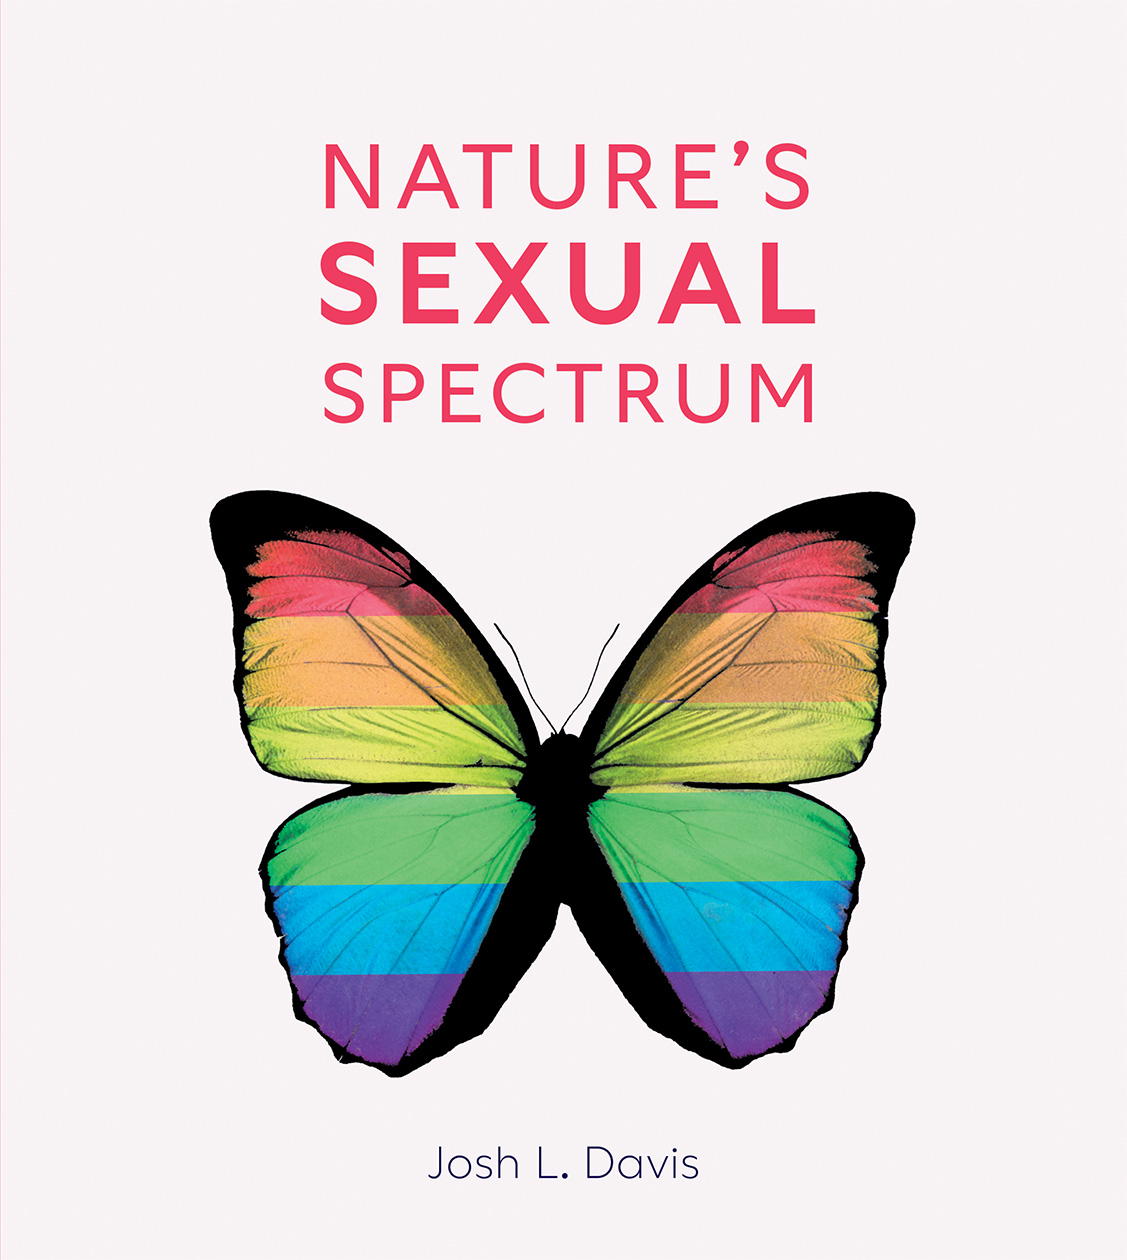 Cover of 'Nature's Sexual Spectrum', featuring a butterfly with rainbow wings on a white background.